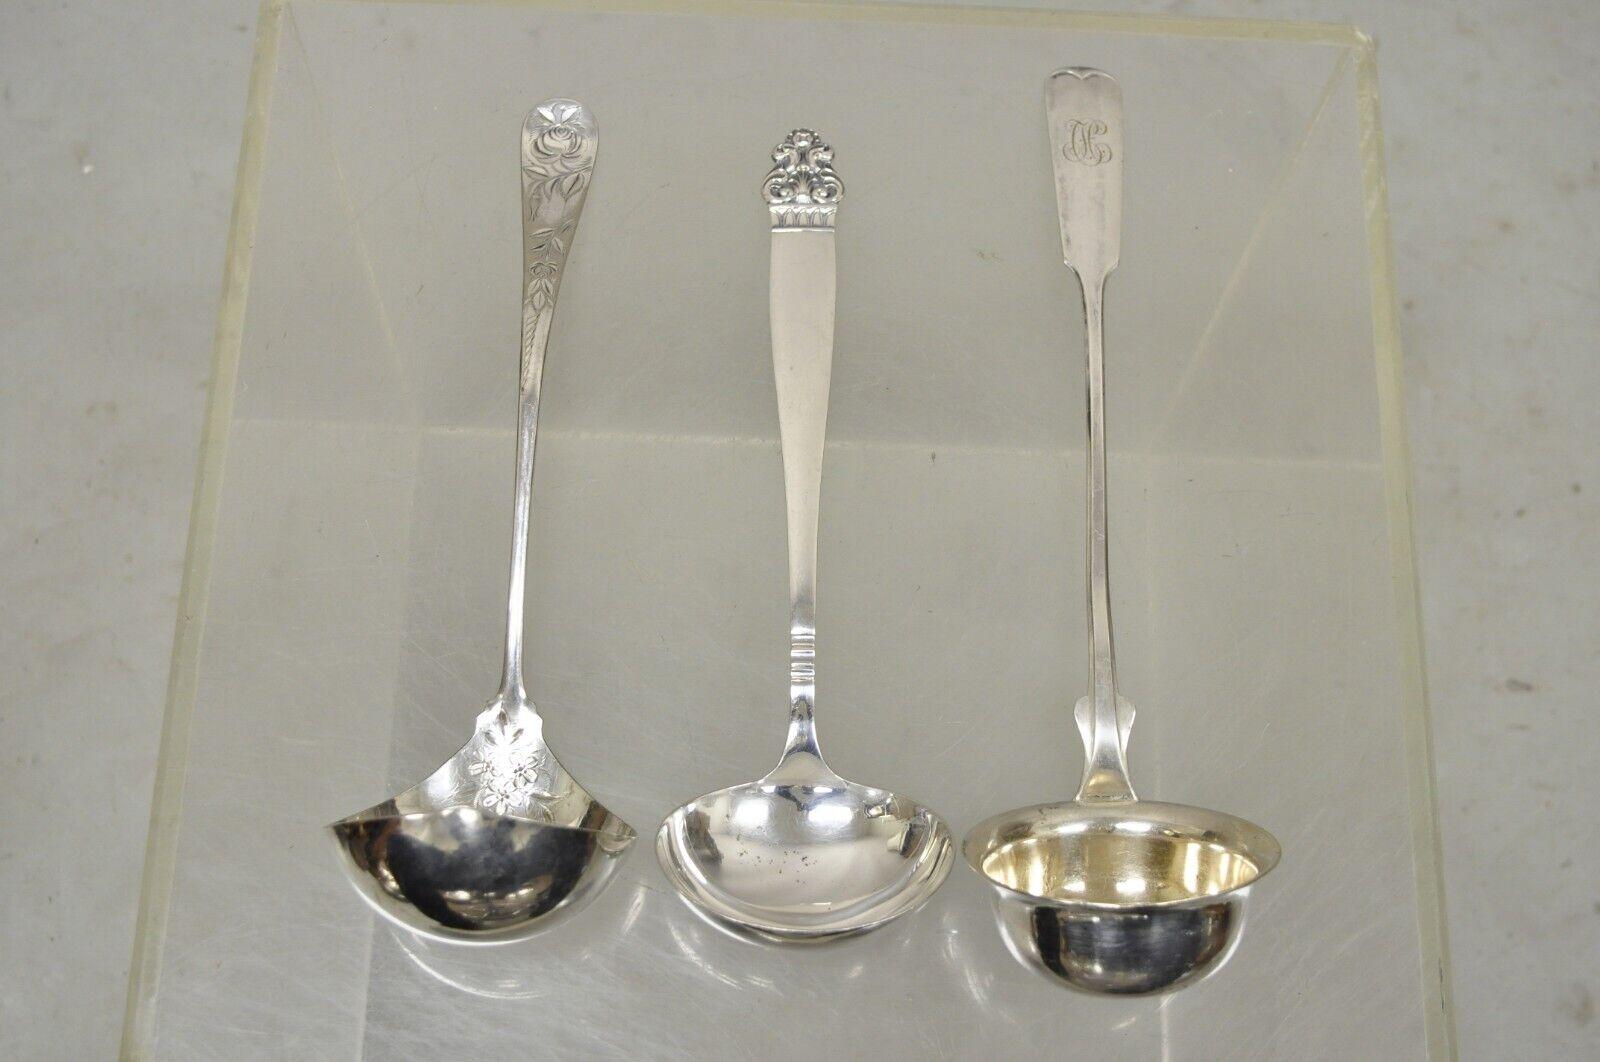 Antique Silver Plated Soup Spoon Ladles TH Marthinsen Holmes Edwards - 3 Pieces. Item features (3) Soup ladles, (1) by TH Marthinsen, Norway, (1) Holmes Edwards (1) Unmarked, very nice vintage pieces. 
circa Mid-20th century. Measurements: 12